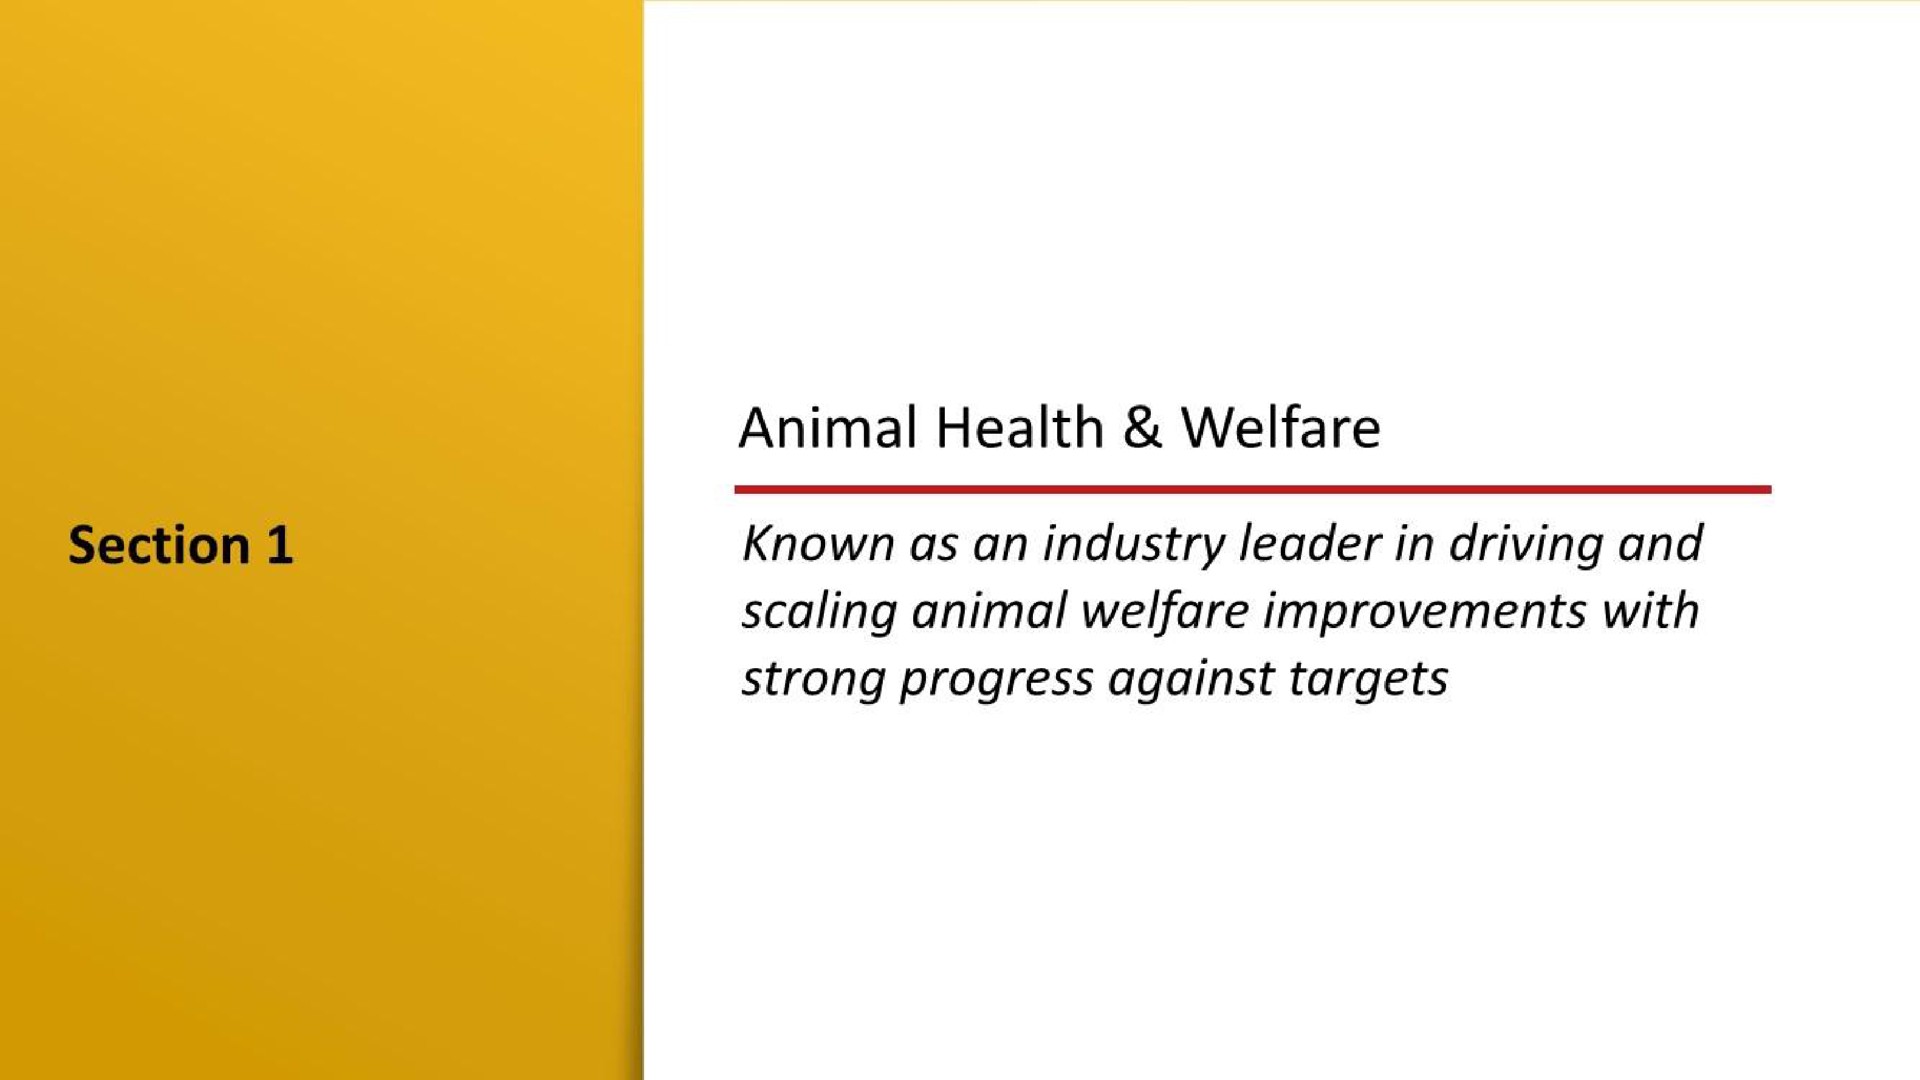 animal health welfare known as an industry leader in driving and scaling animal welfare improvements with strong progress against targets | McDonald's